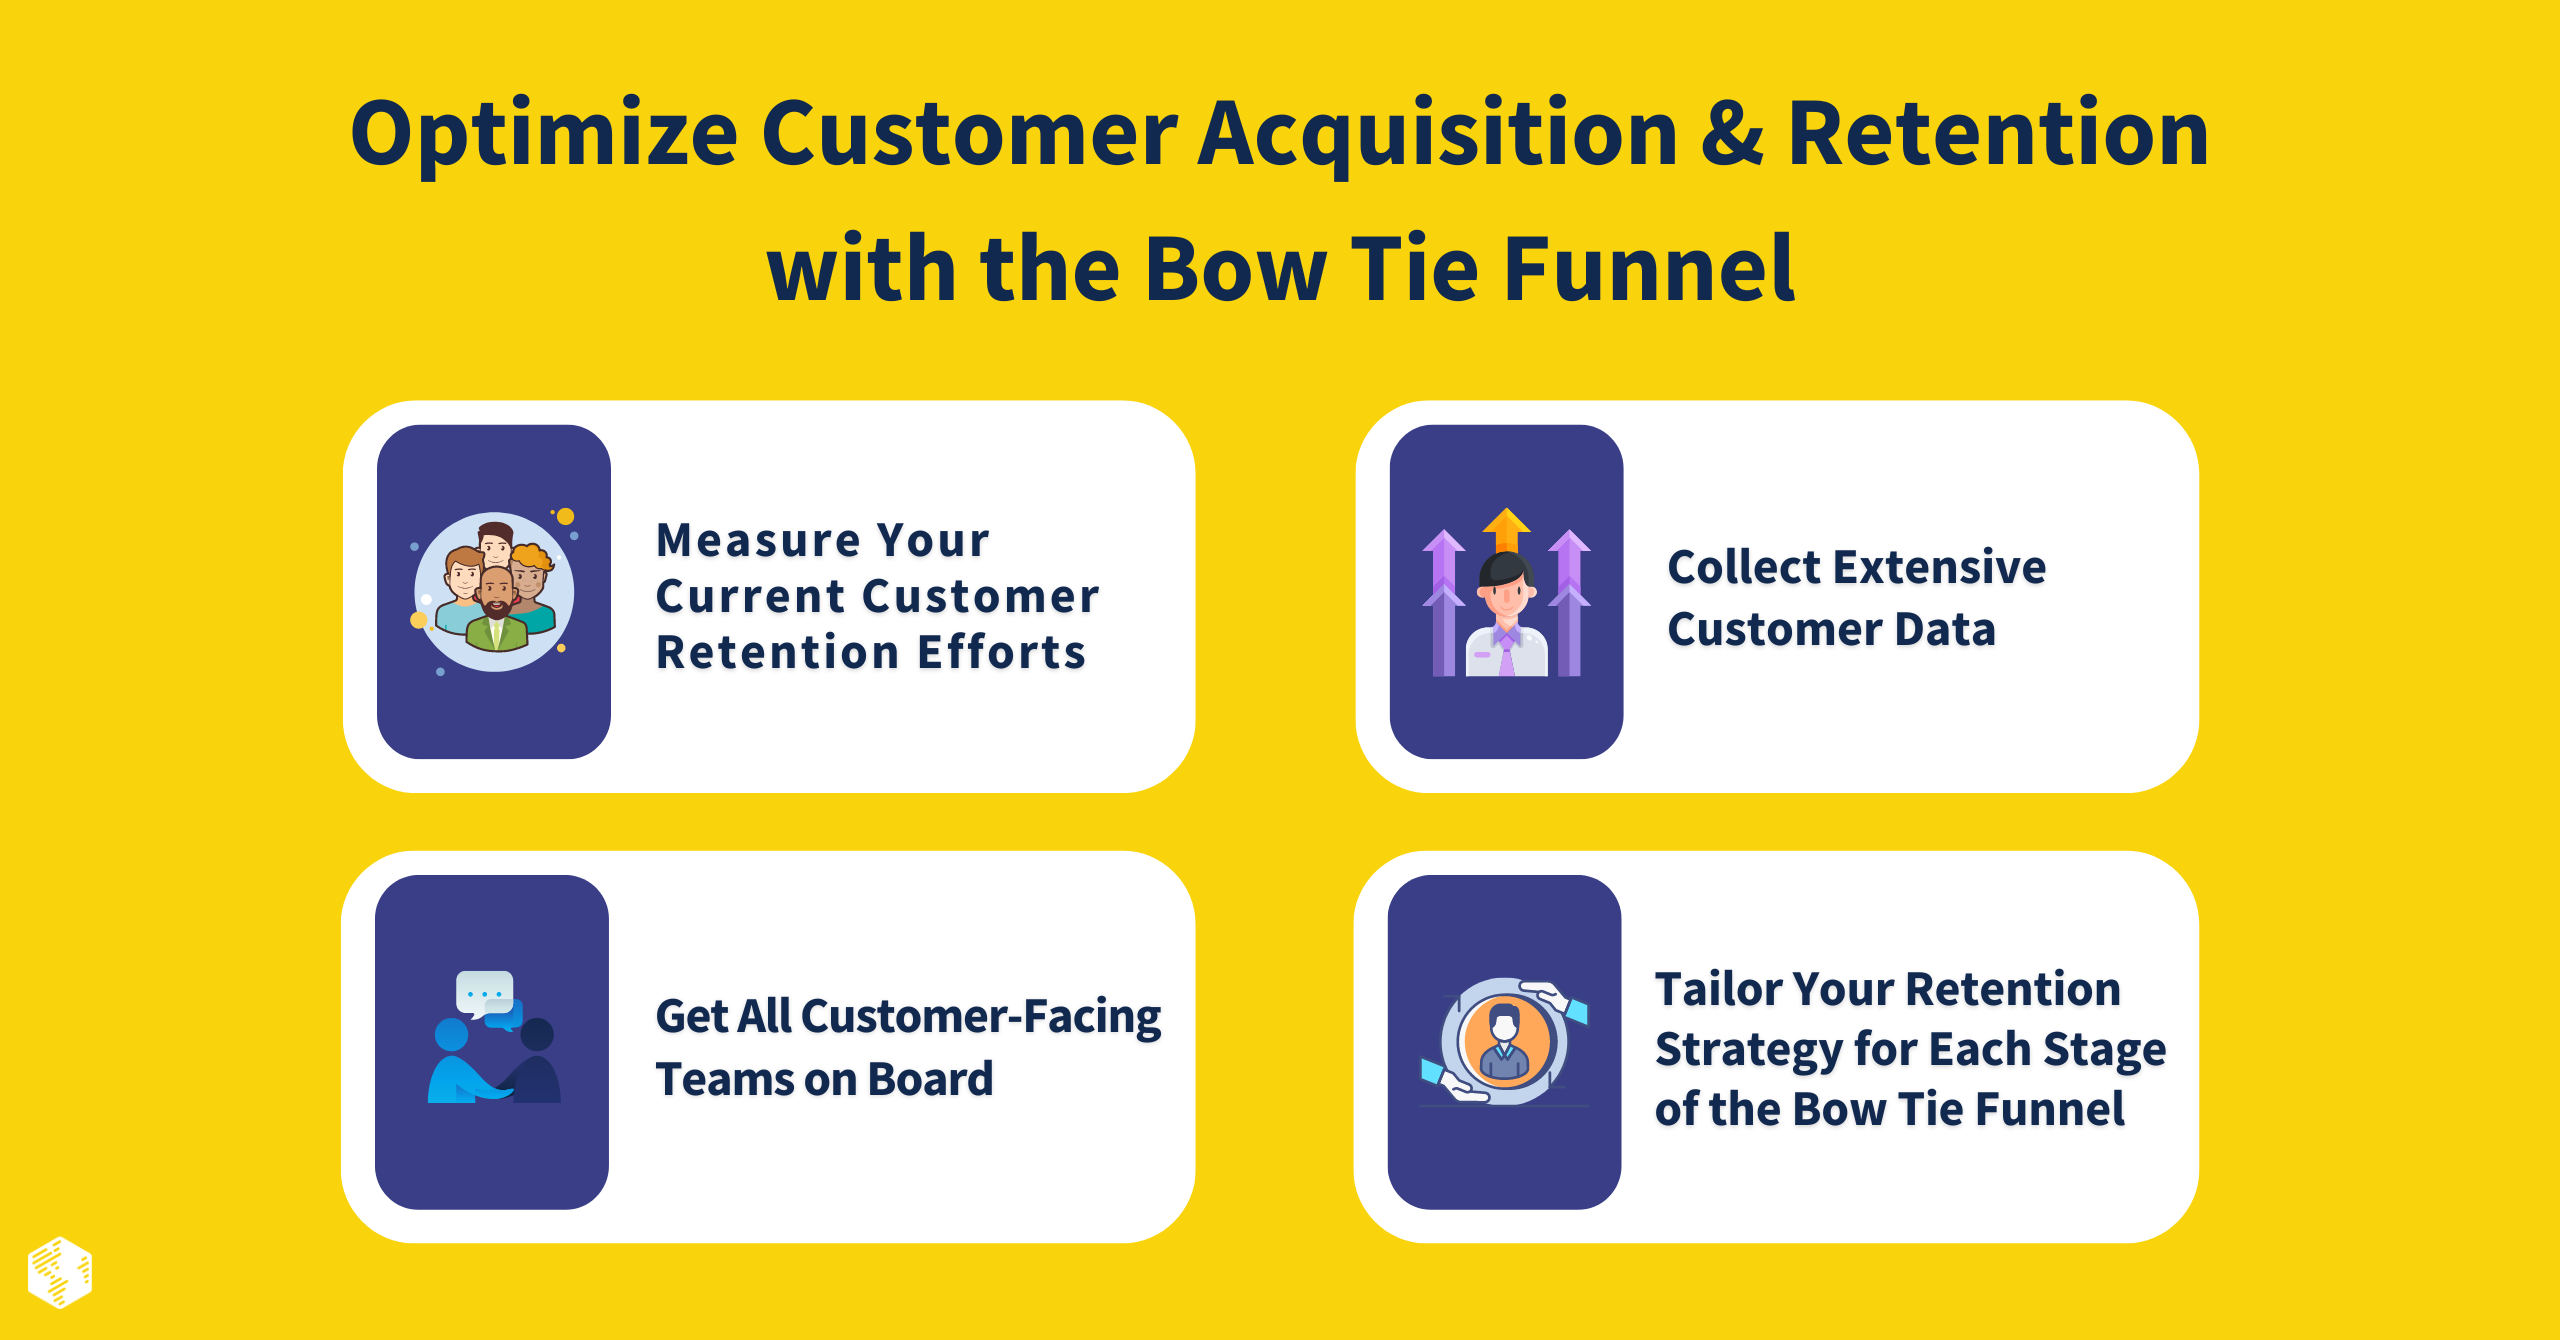 How to Optimize Customer Acquisition & Retention with the Bow Tie Funnel 